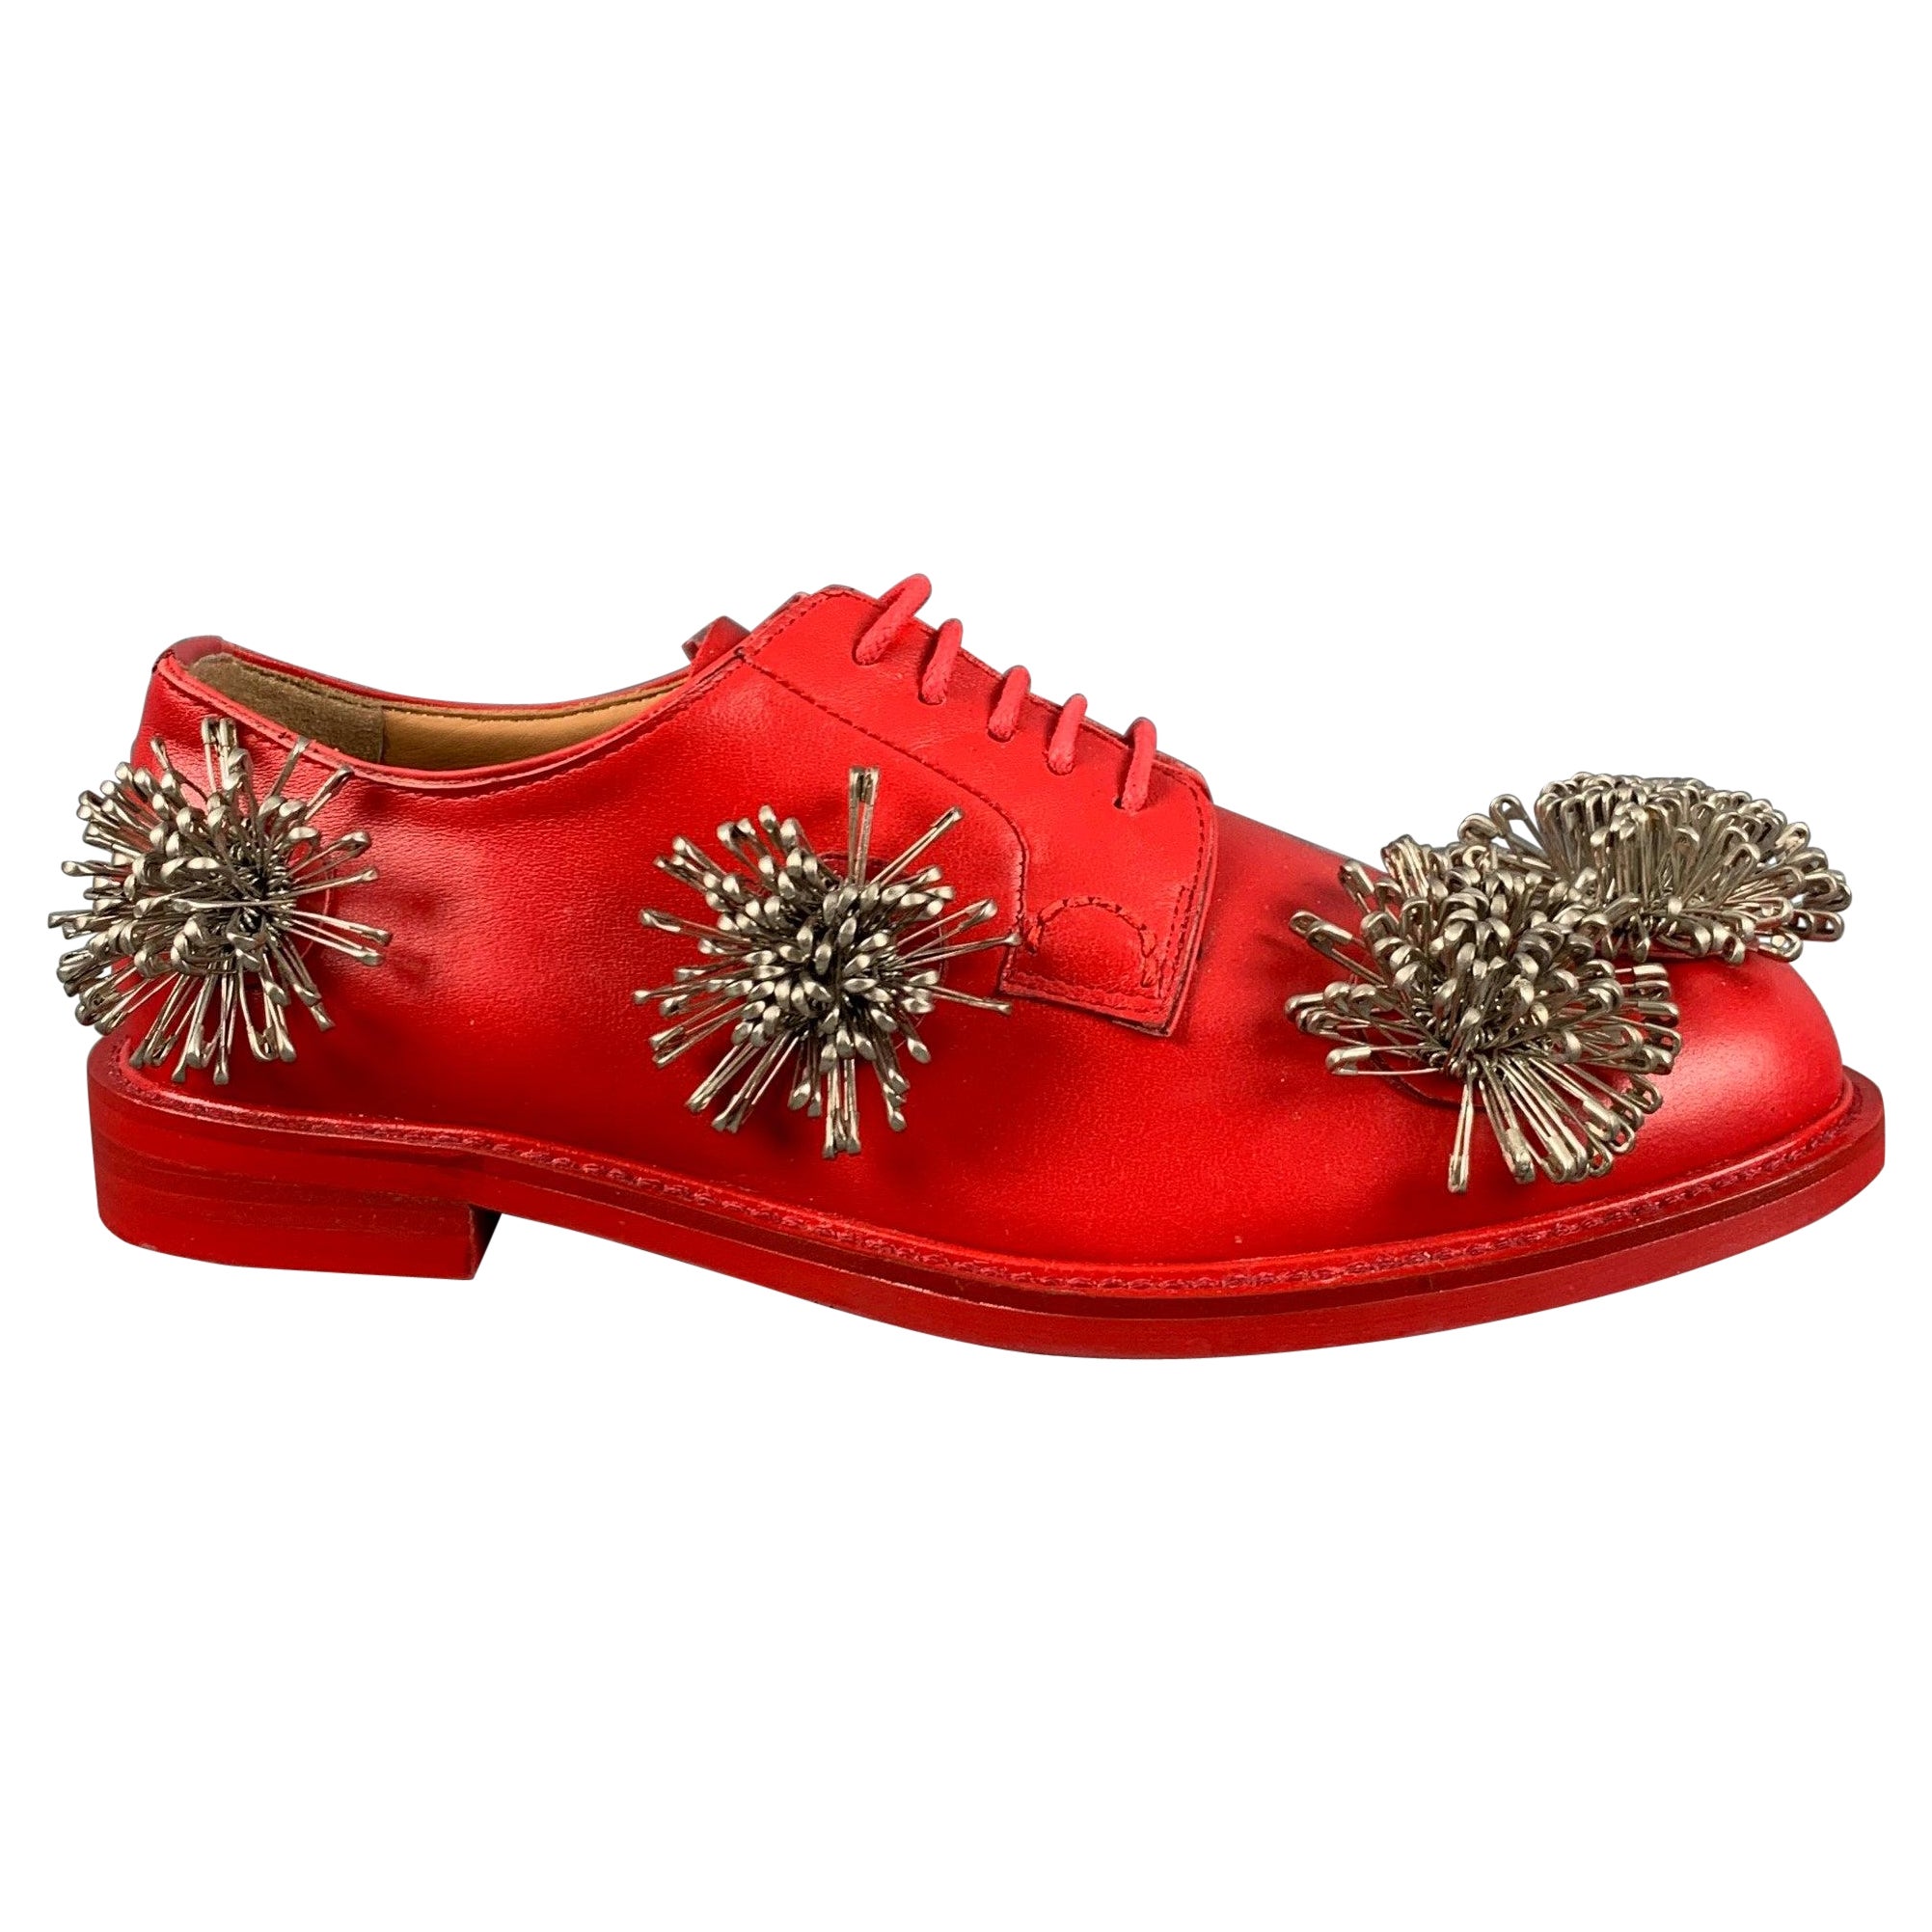 NOIR KEI NINOMIYA Size 6 Red Leather Applique Lace Up Laces For Sale